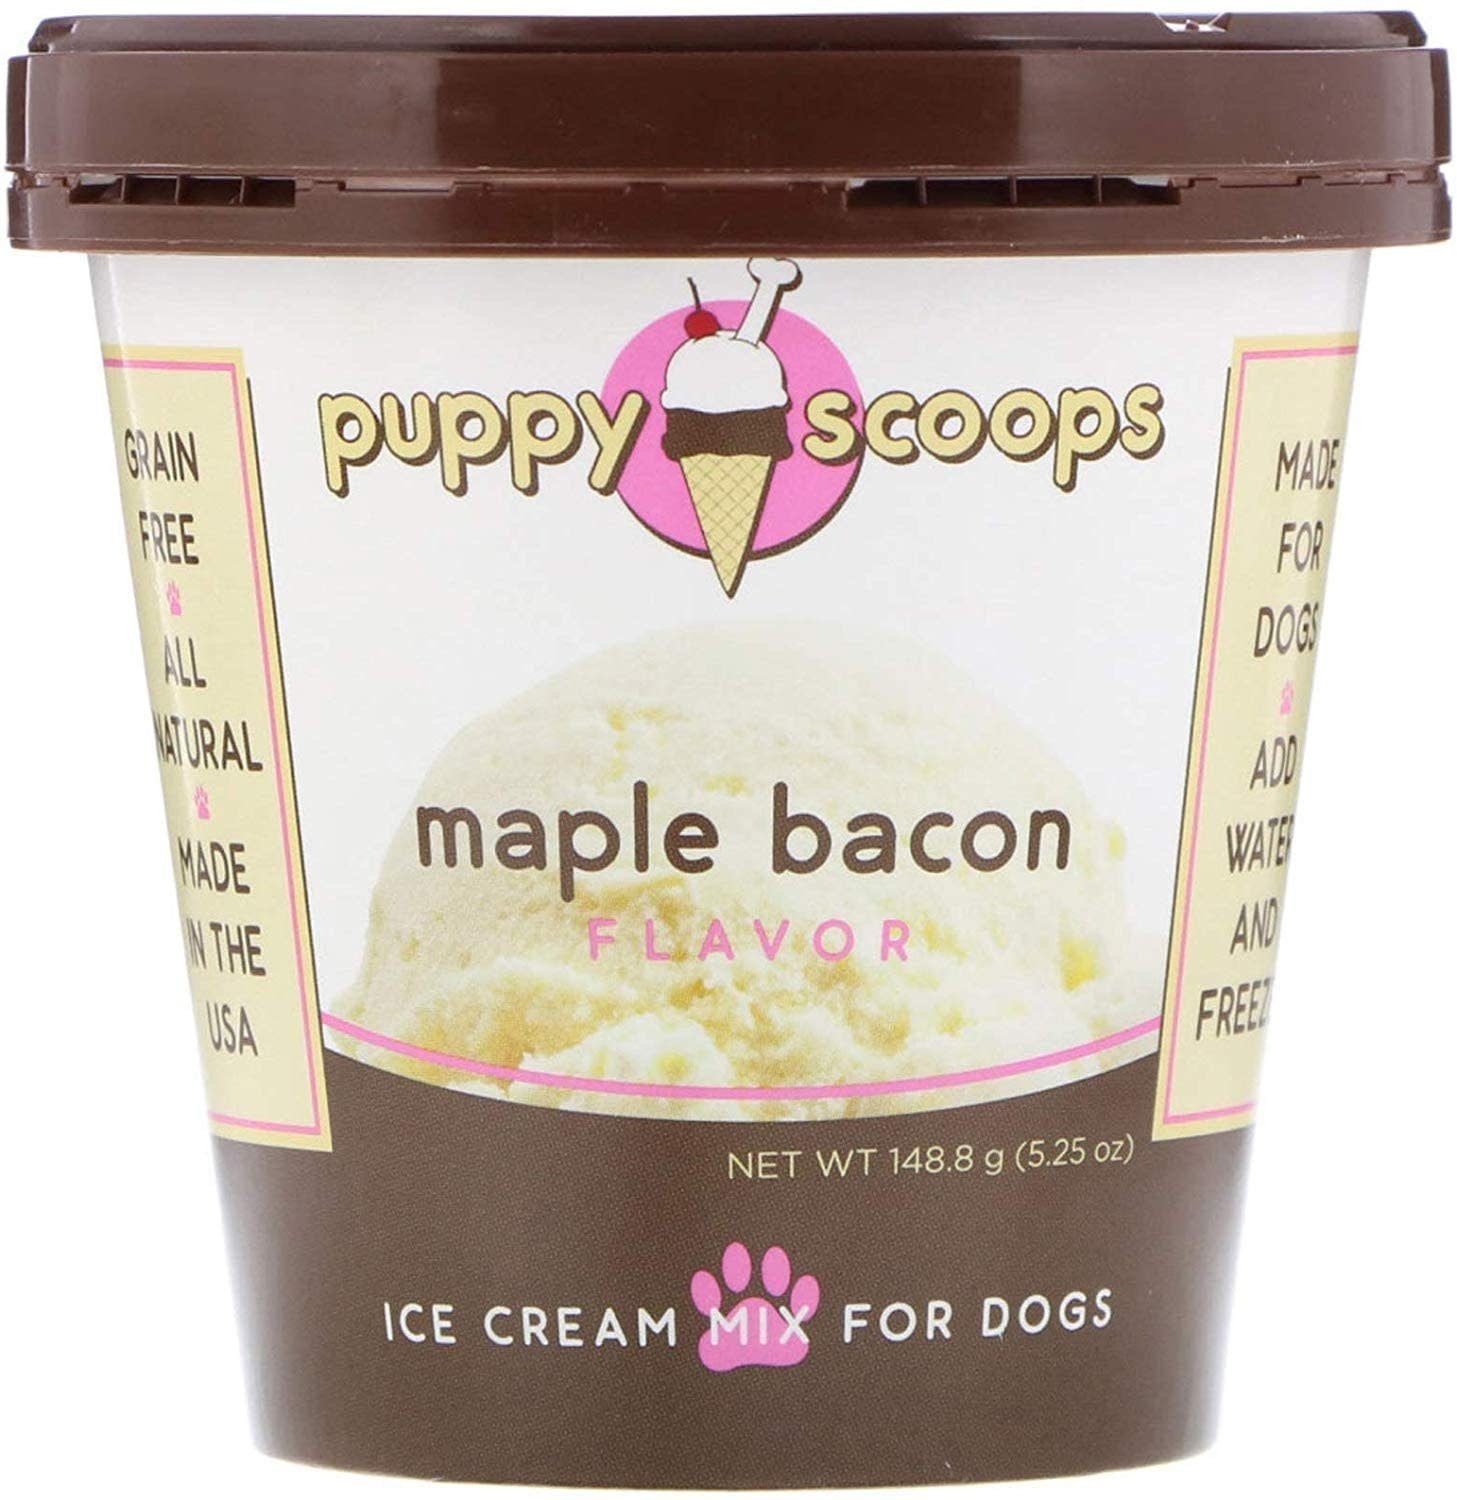 Puppy Scoops Ice Cream Mix - Maple Bacon, Cup Size, 2.32 oz